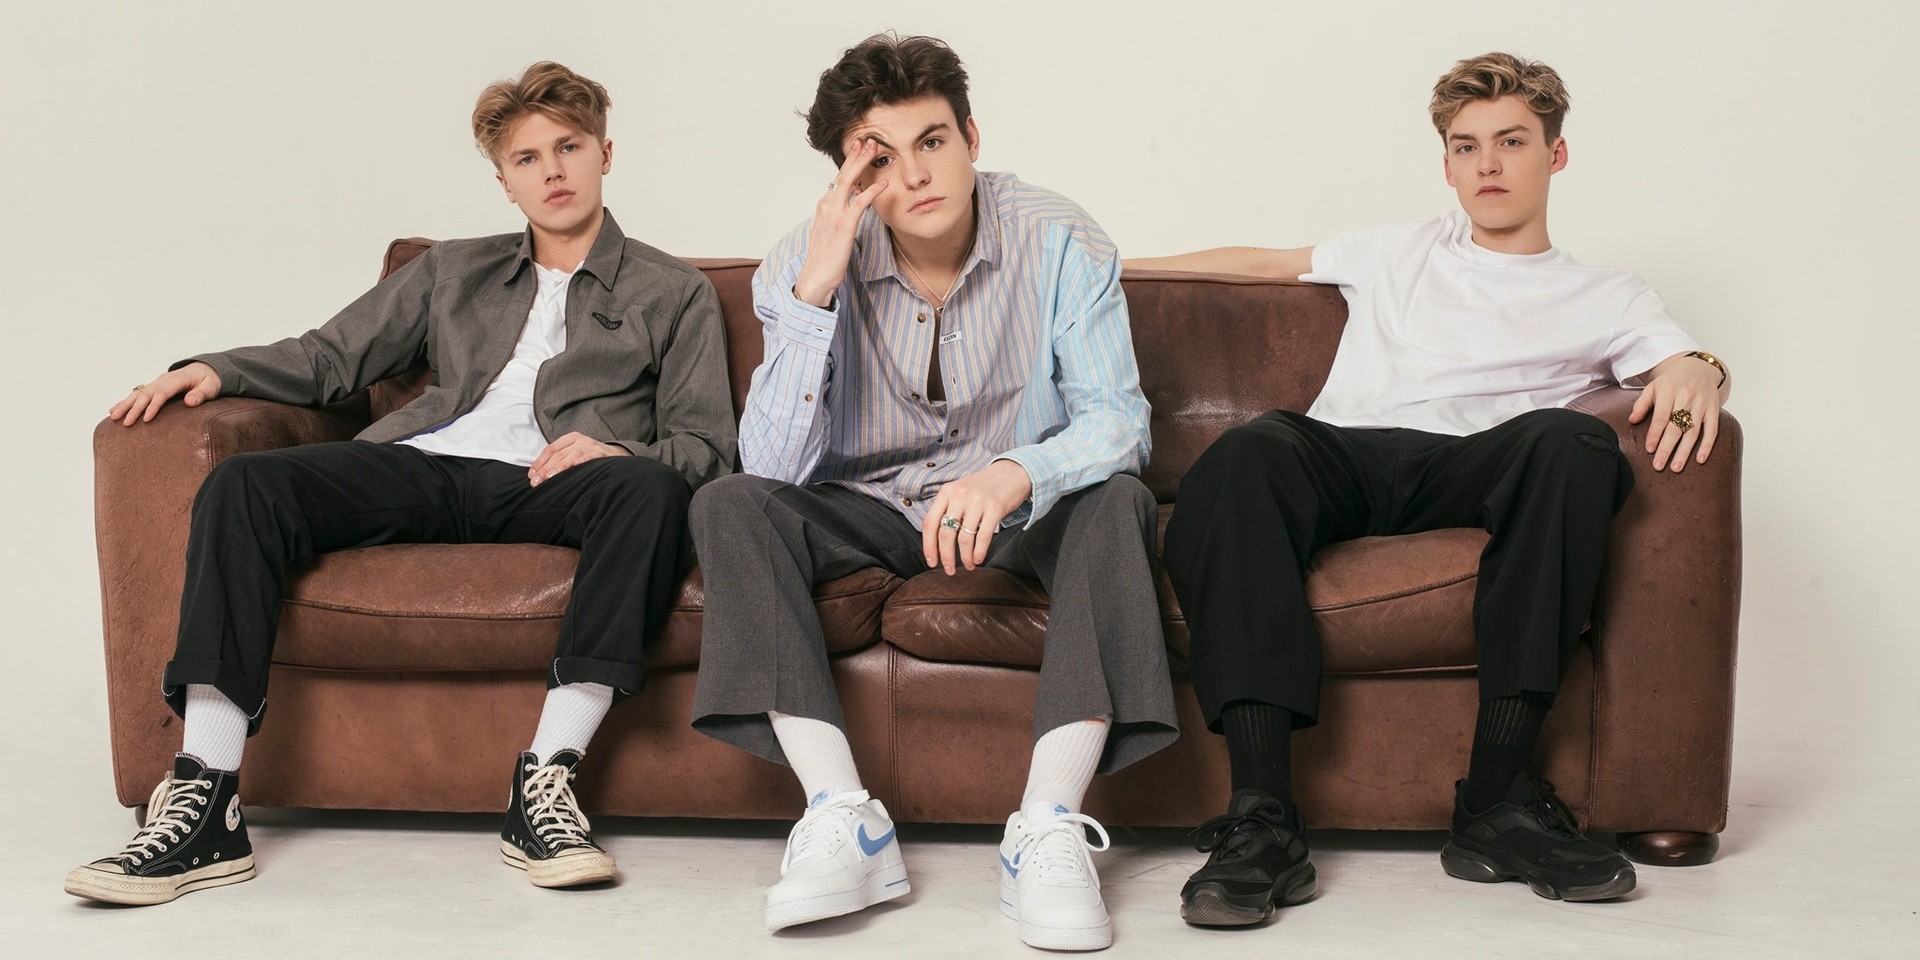 New Hope Club to perform in Singapore this October as part of its Love Again World Tour